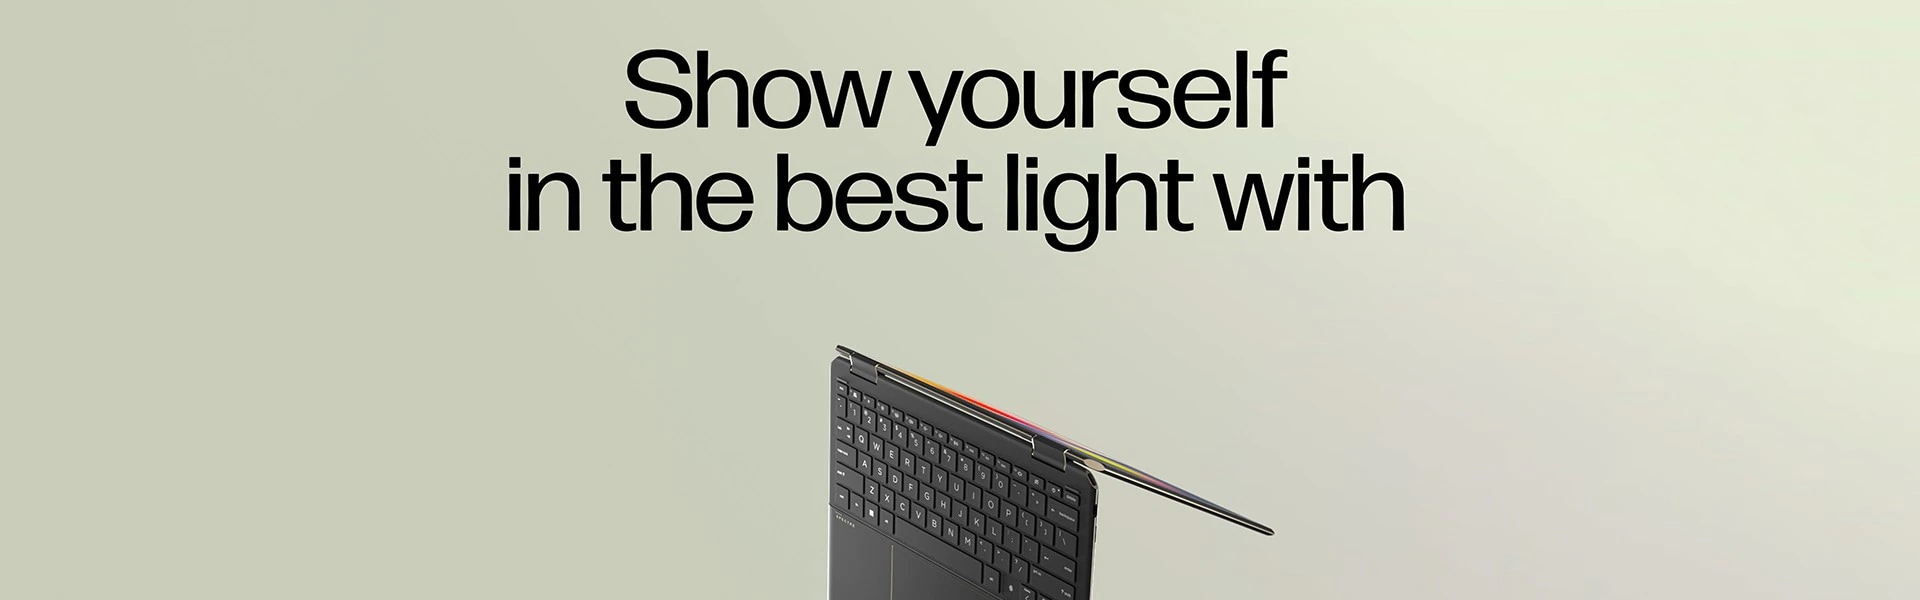 Show yourself in the best light with